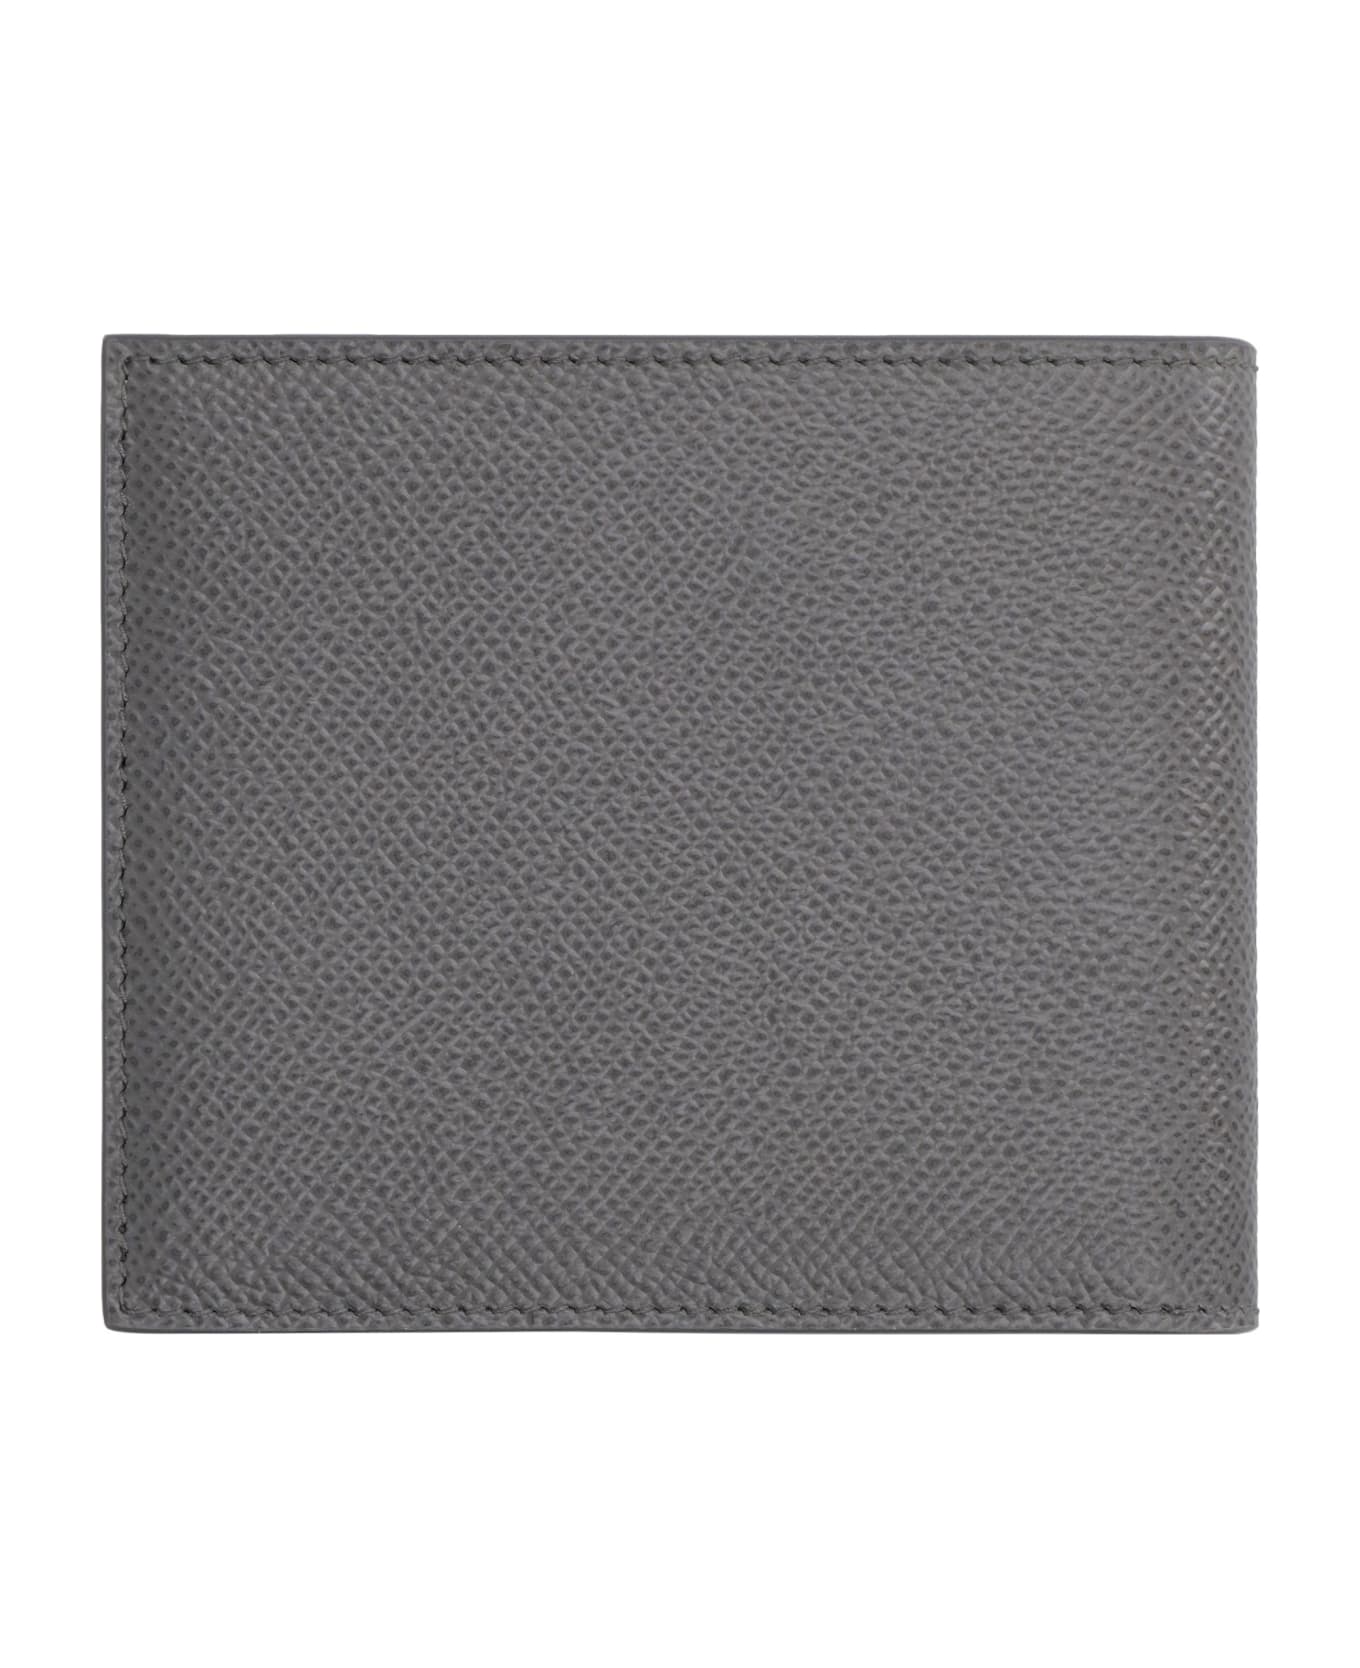 Dolce & Gabbana Leather Flap-over Wallet - grey